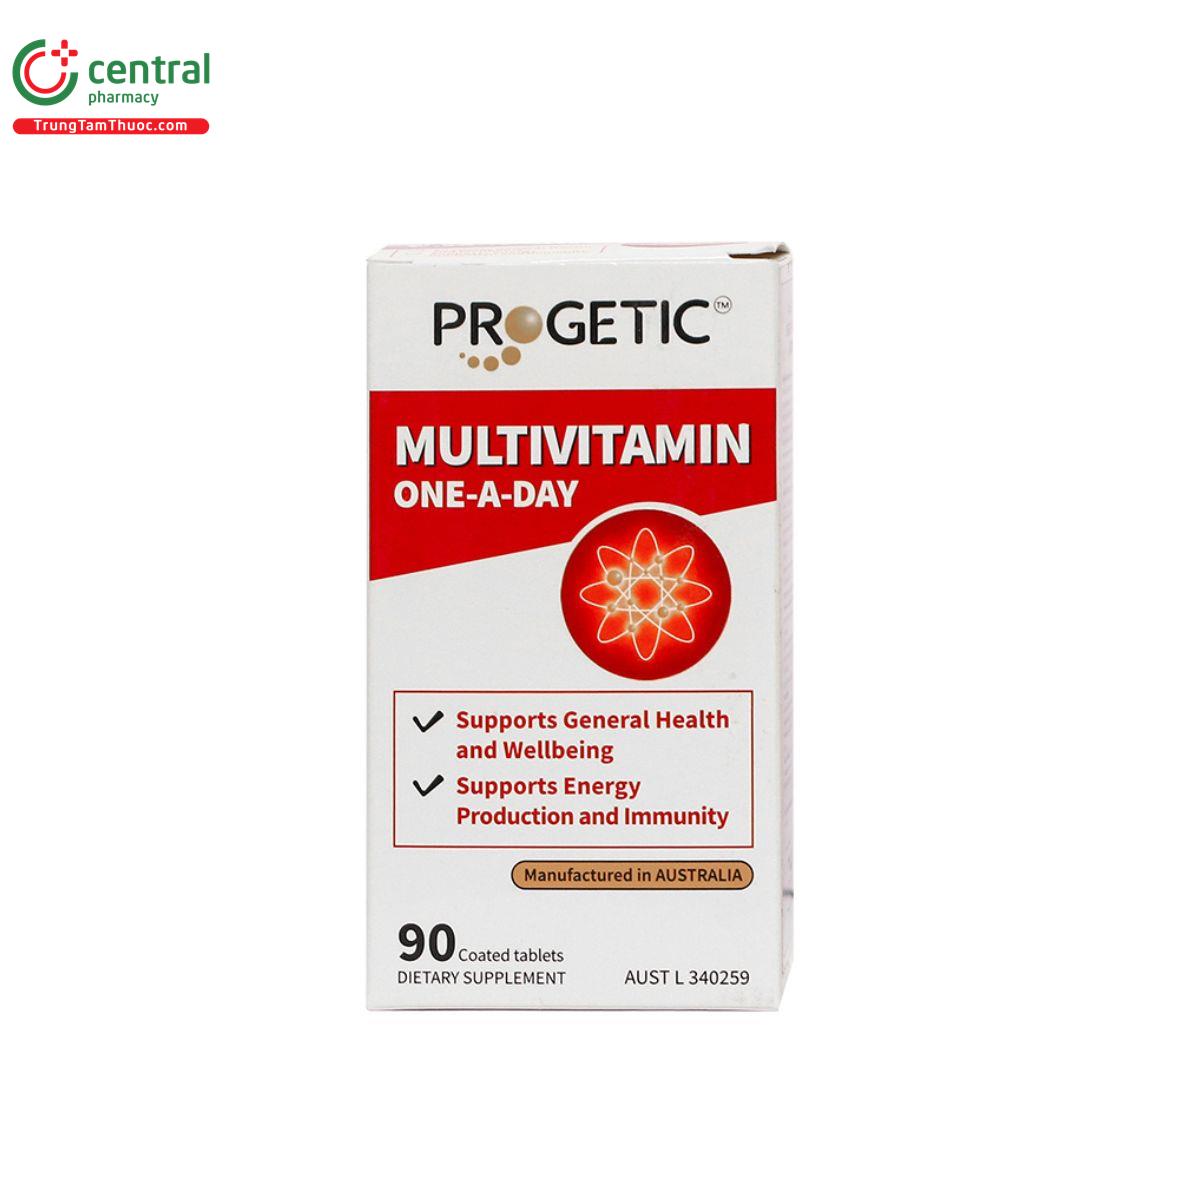 progetic multivitamin one a day 1 C1612